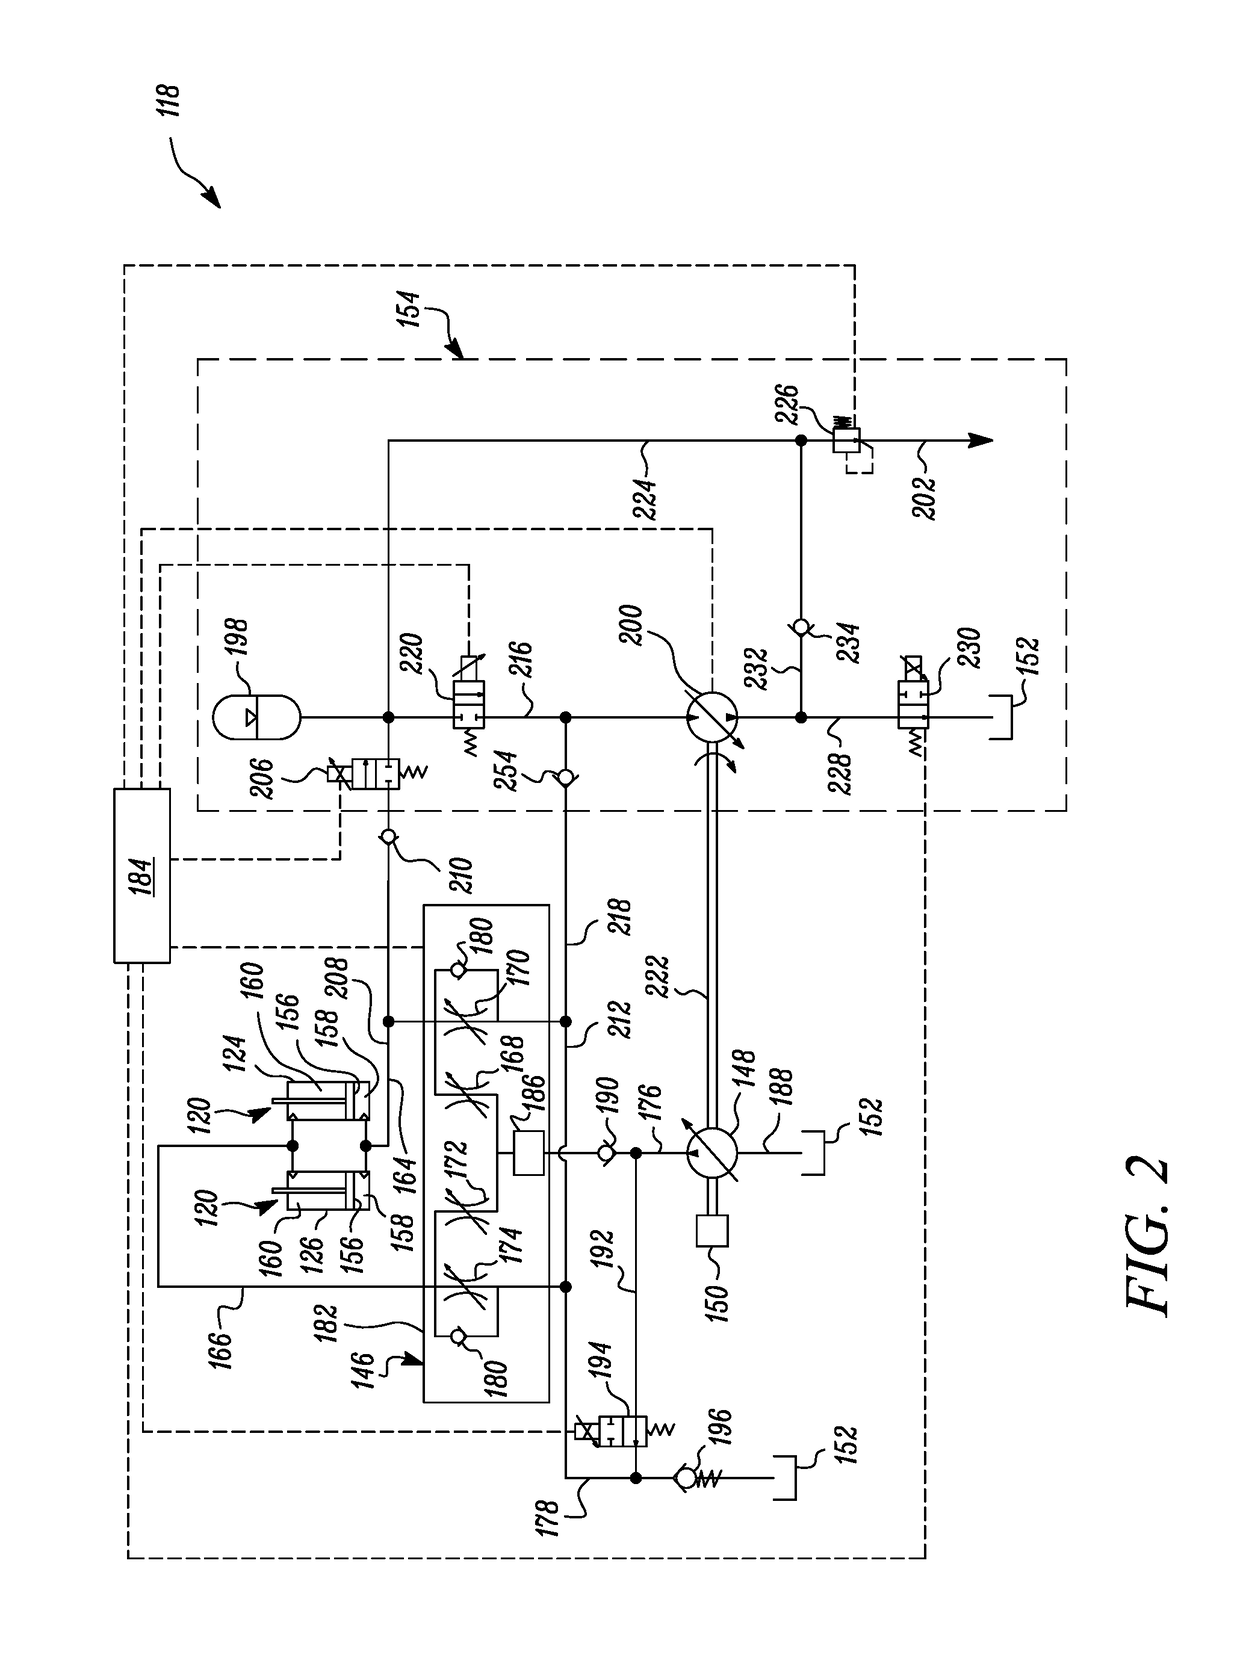 Fluid systems for machines with integrated energy recovery circuit